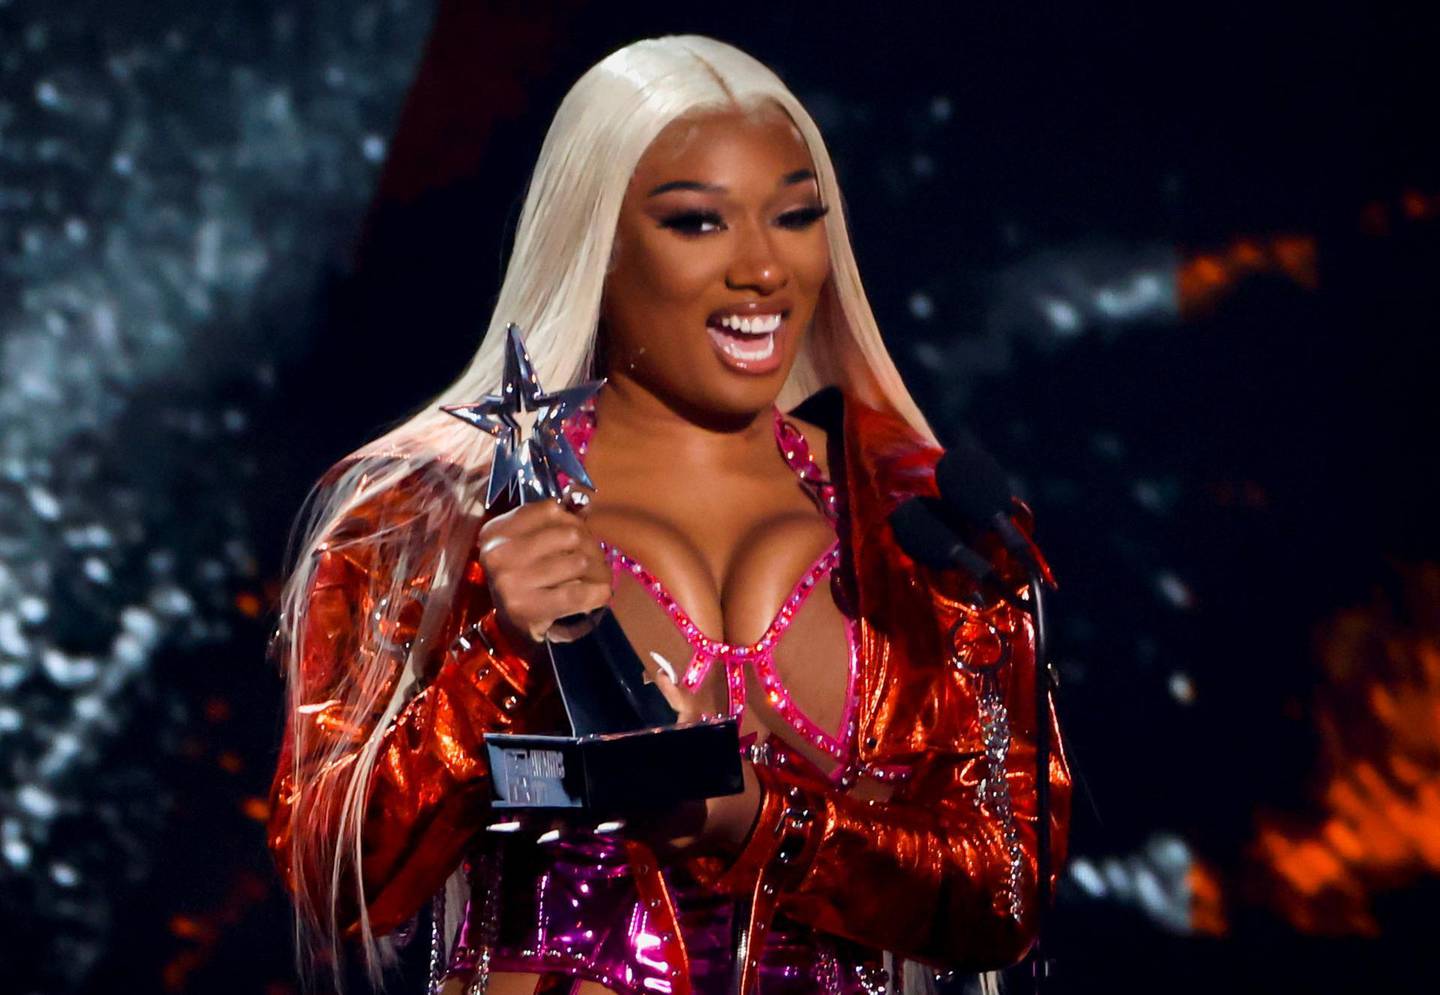 Megan Thee Stallion speaks after receiving the Viewer's Choice Award during the BET Awards at Microsoft theatre in Los Angeles, California, U.S., June 27, 2021. REUTERS/Mario Anzuoni